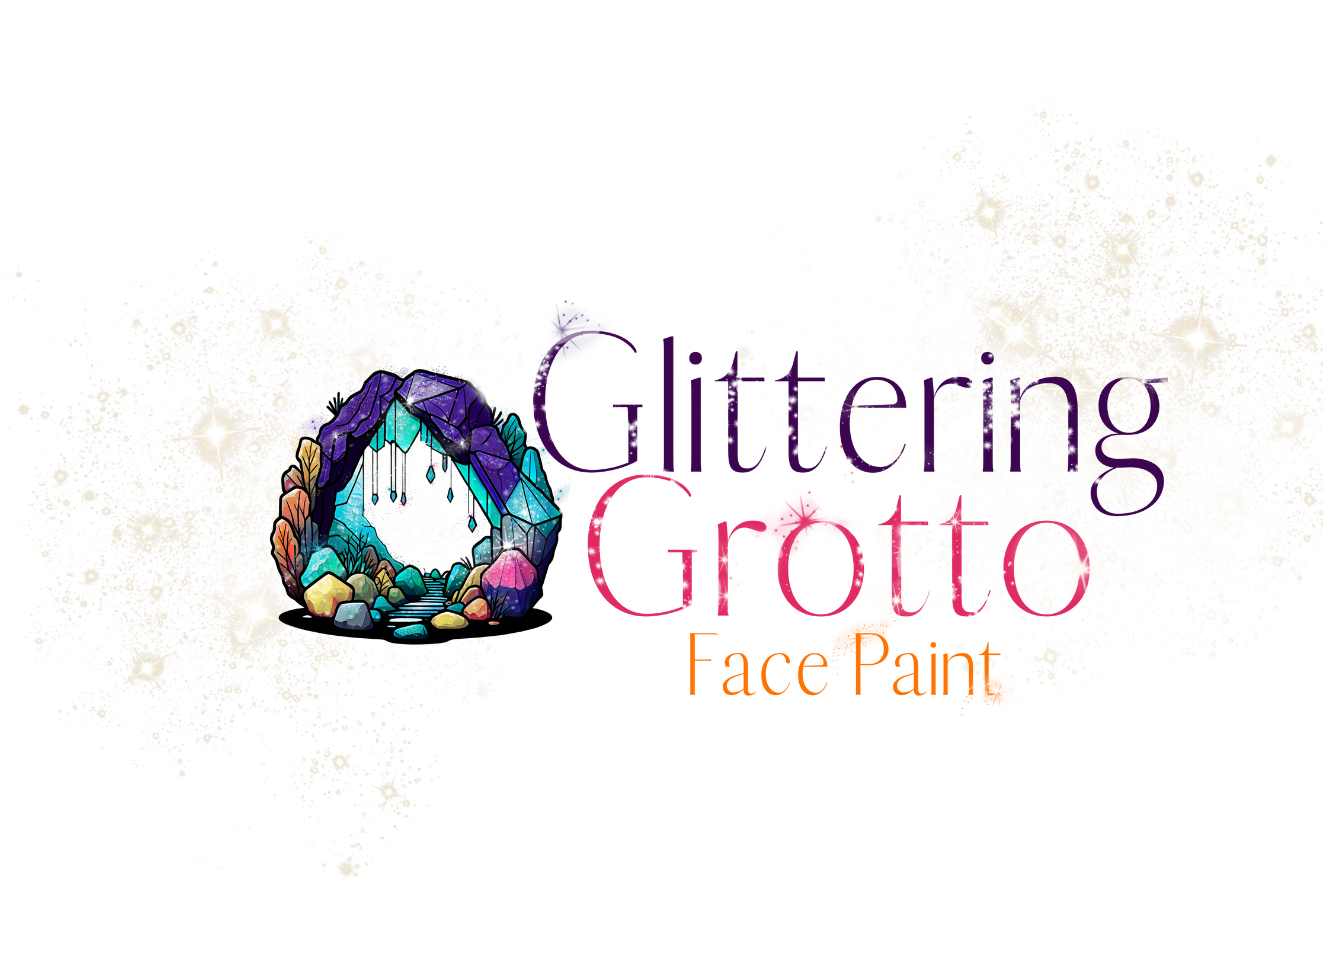 Glittering Grotto Face Paint